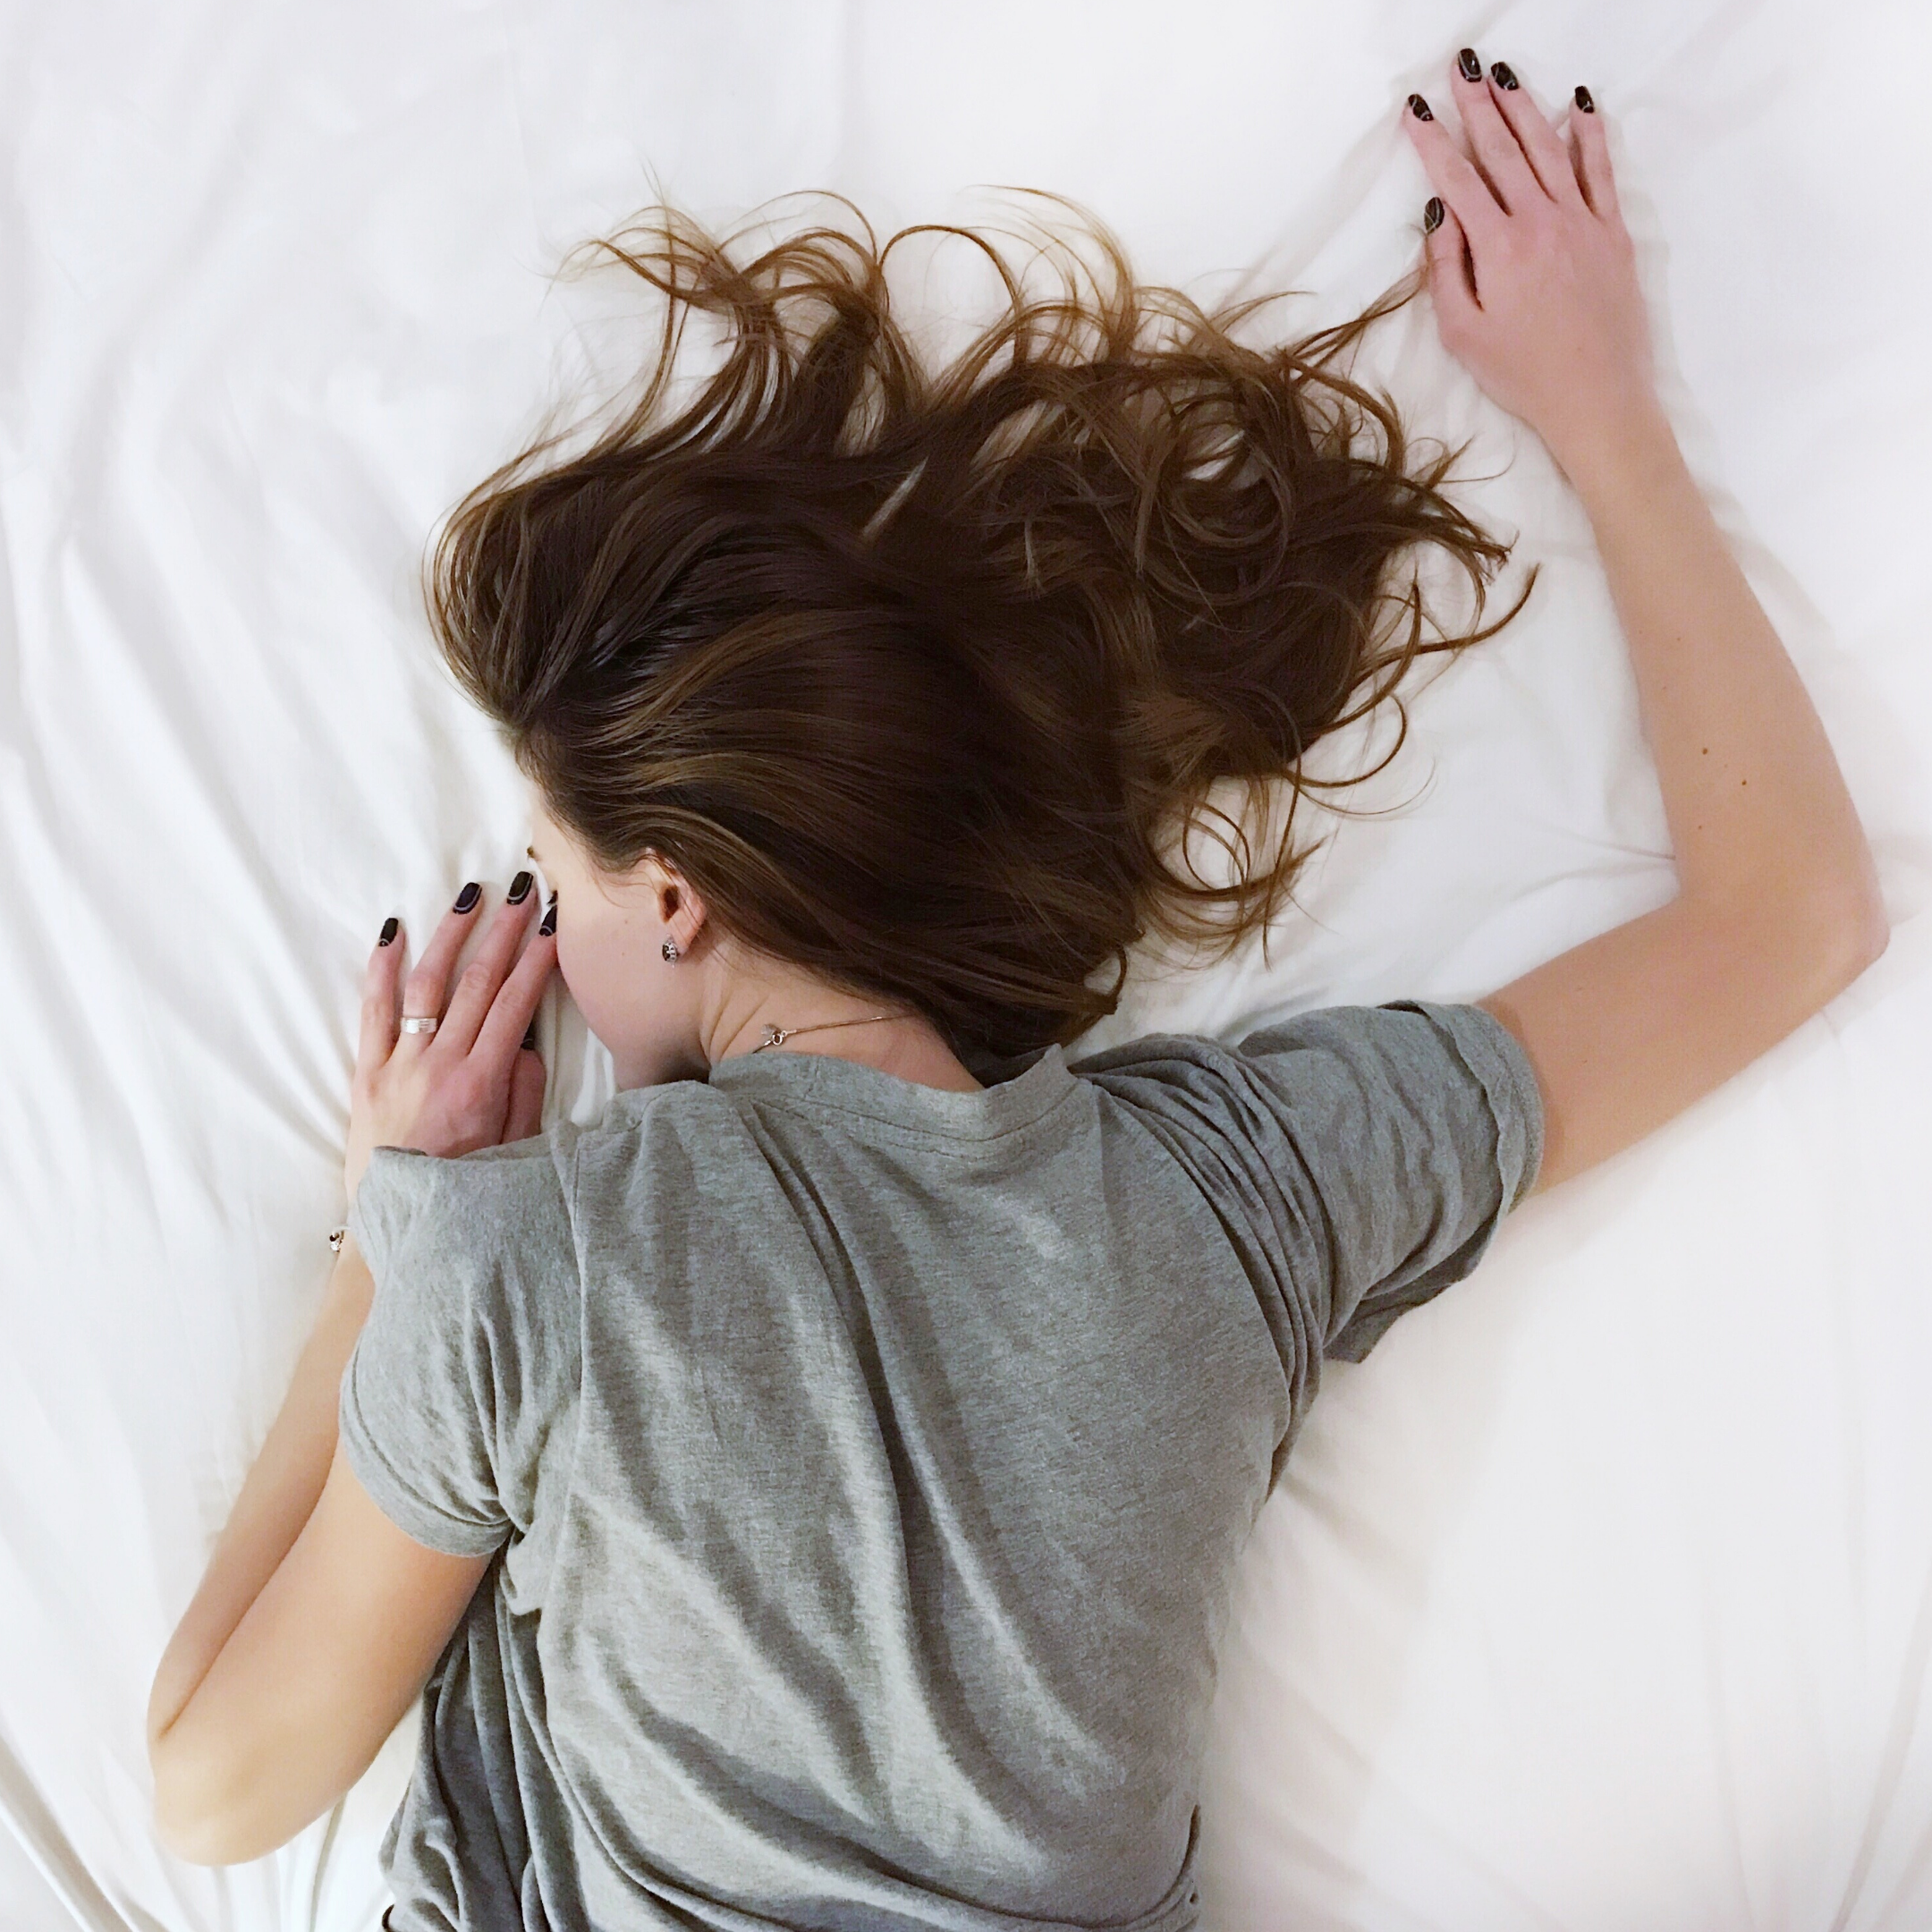 4 Tips For Tackling Insomnia Head On